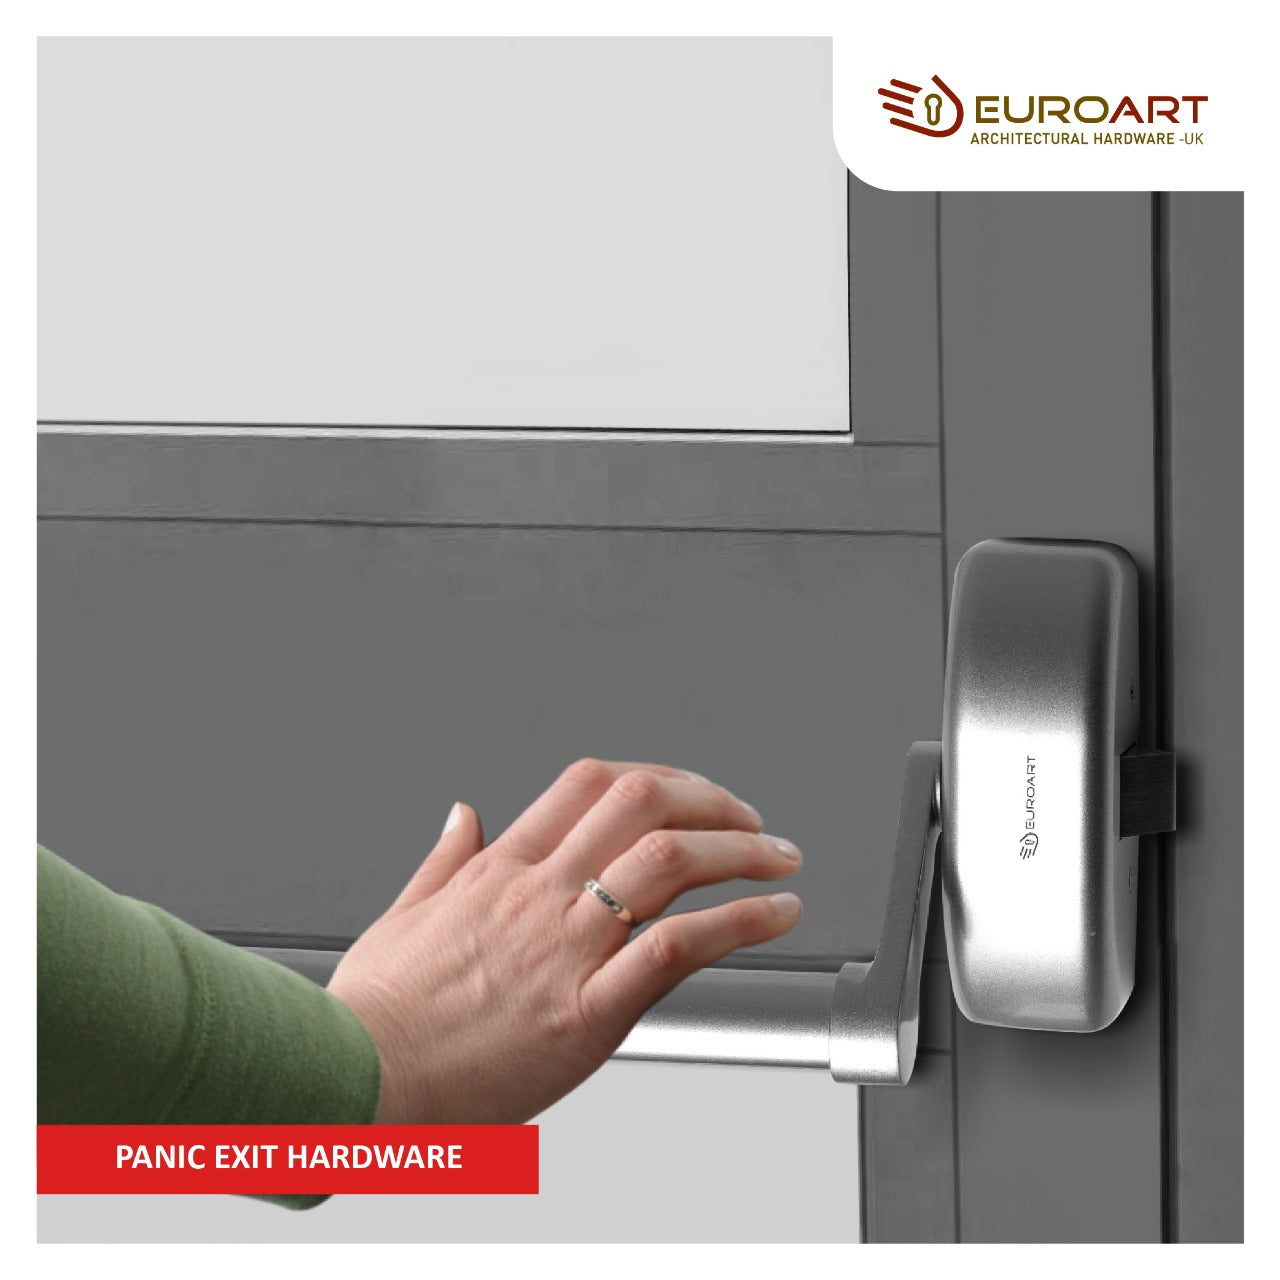 EuroArt Panic Exit Hardware - High-quality, Reliable and Safety-Compliant Solutions for Emergency Exits